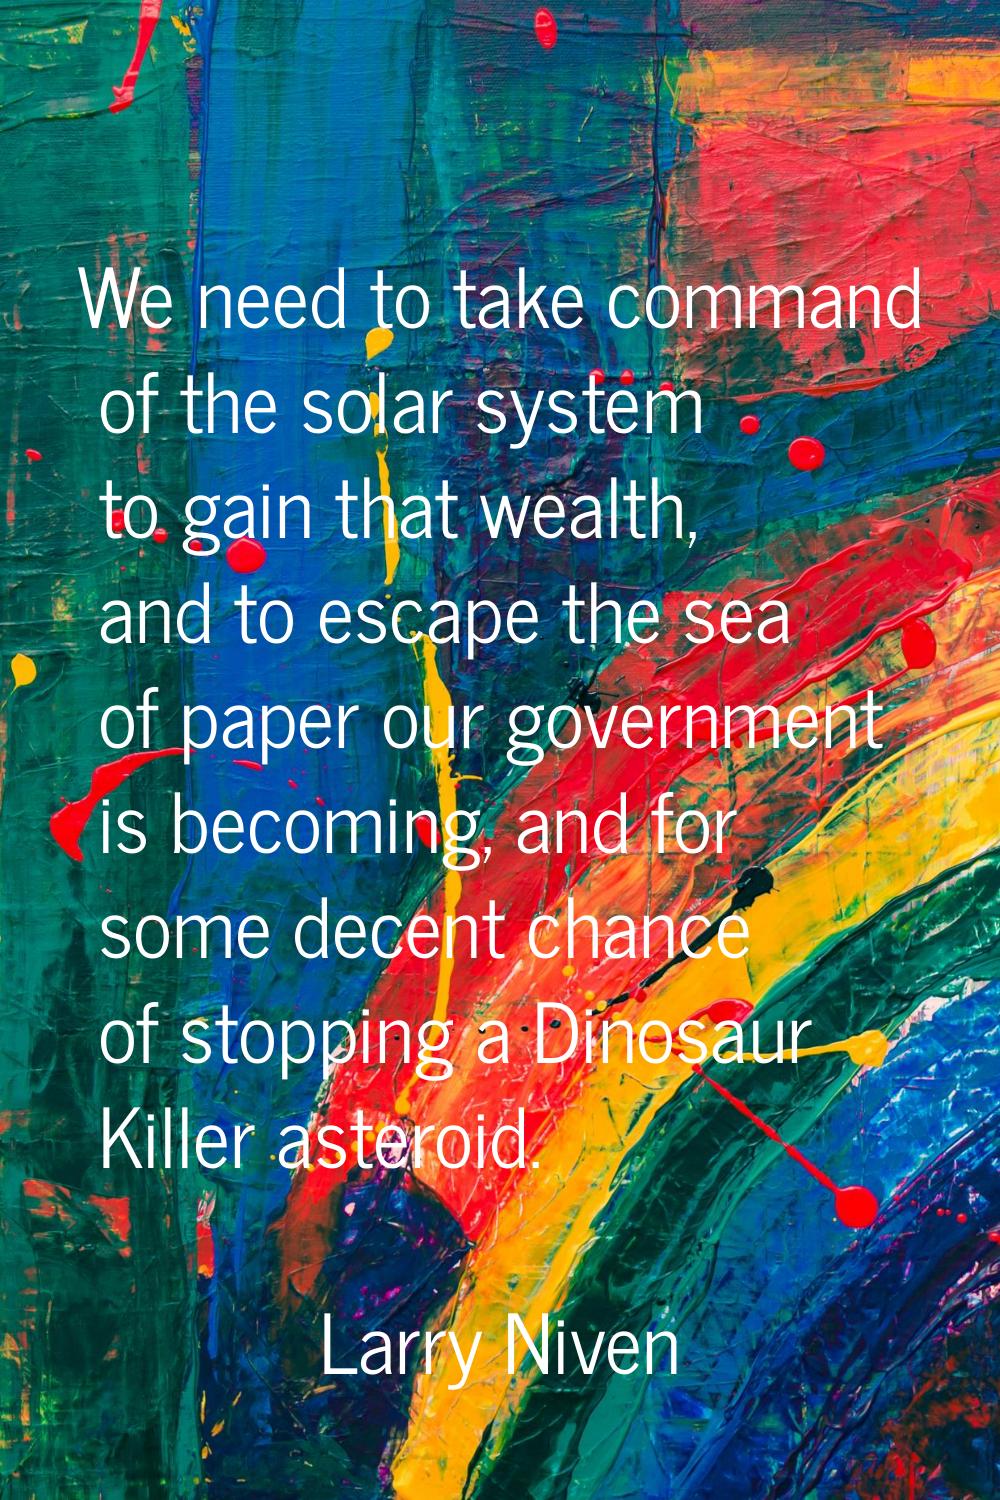 We need to take command of the solar system to gain that wealth, and to escape the sea of paper our